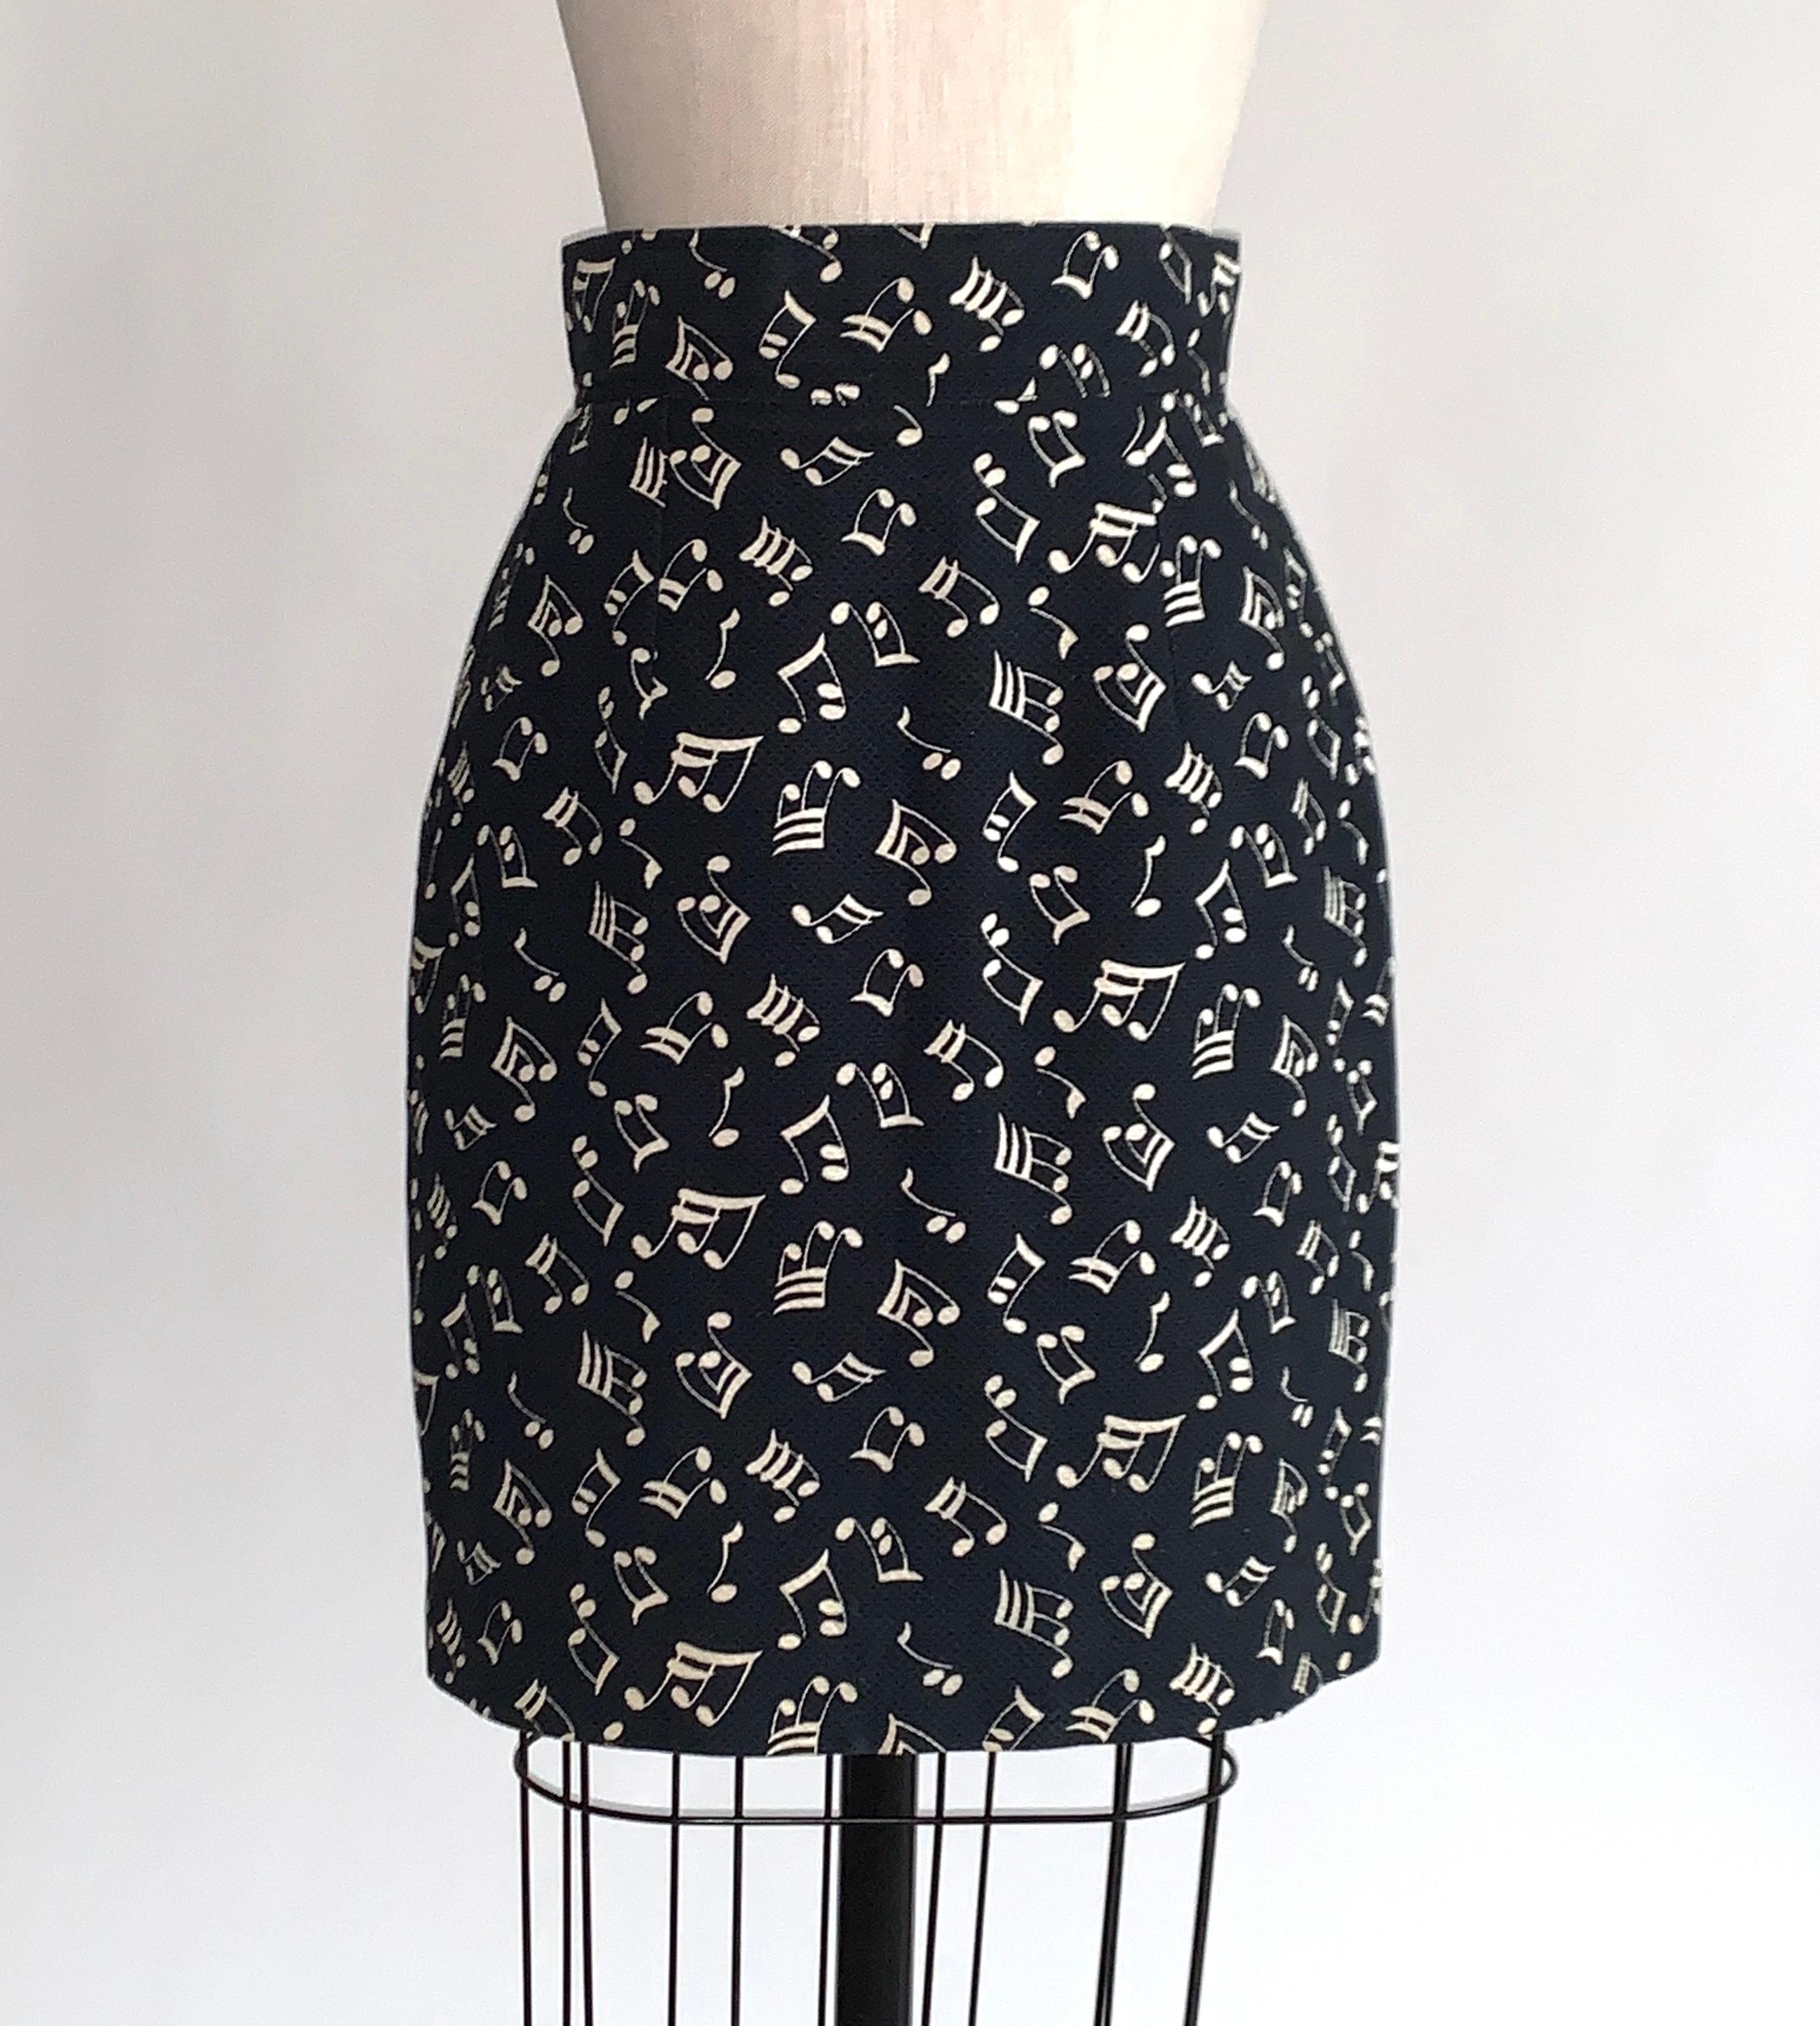 Patrick Kelly vintage 80's black and white music note print pencil skirt in a waffle-like weave. Front pockets. Back zip and button.

100% cotton, fully lined in 100% acetate.

Made in France.

Size FR 38, US 6. Fits like a modern 2, see